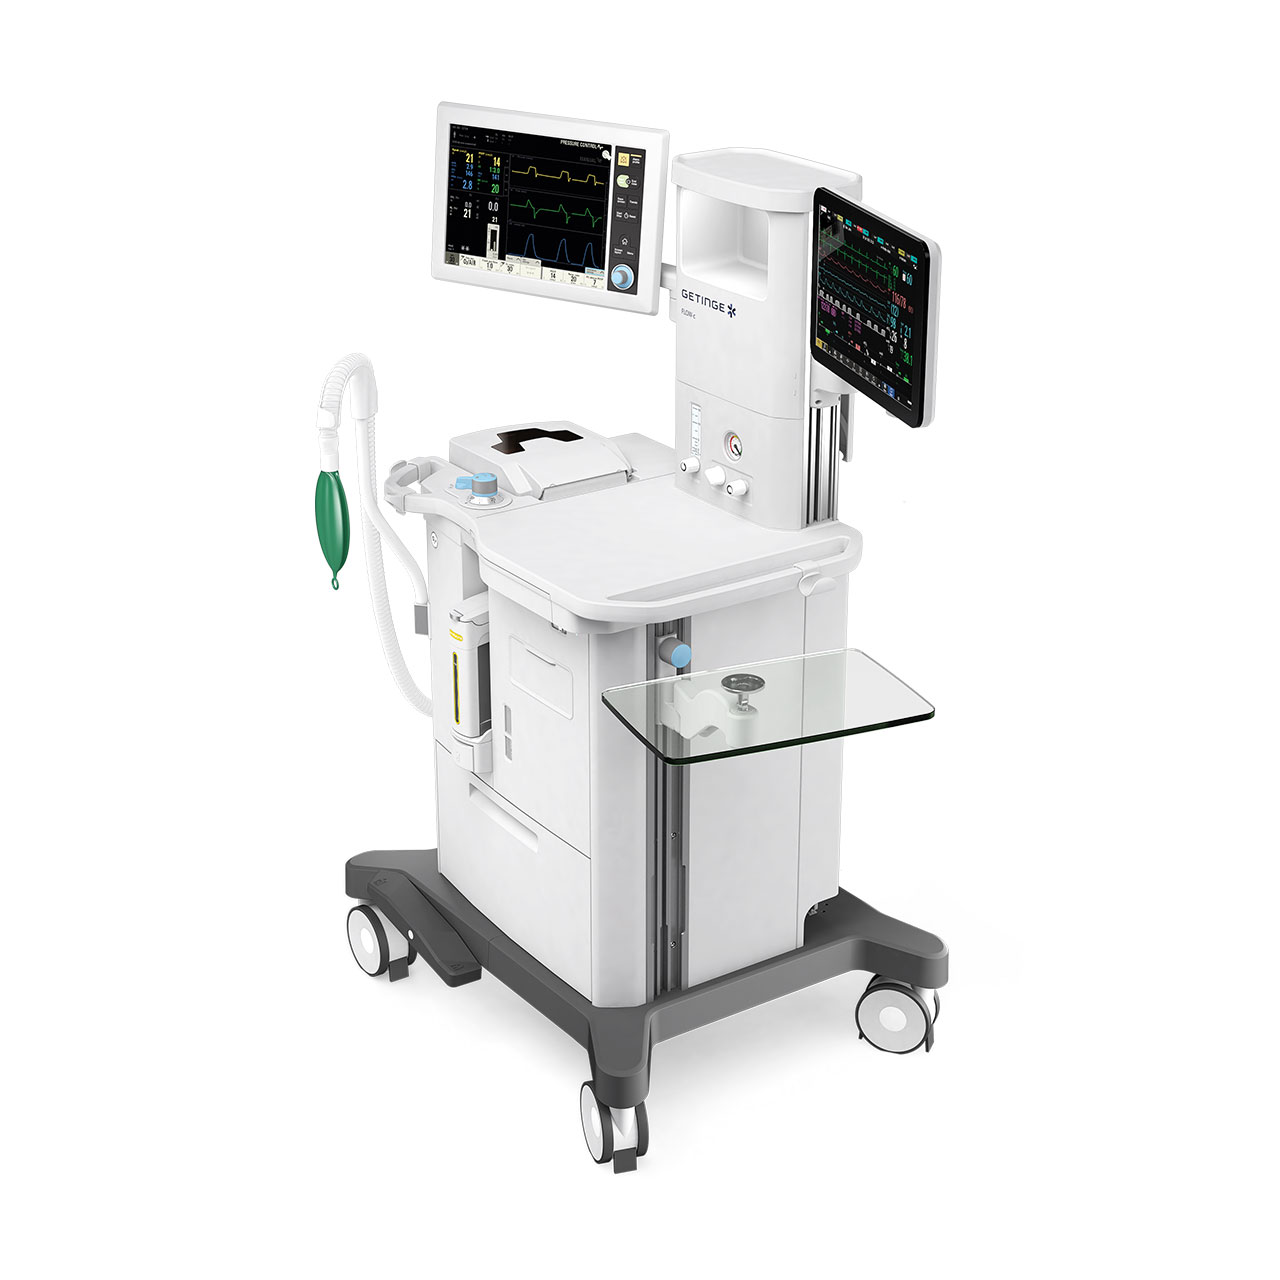 Getinge’s compact anesthesia machine Flow-c has 215 cm multipurpose rails for mount monitors, tables and accessories.